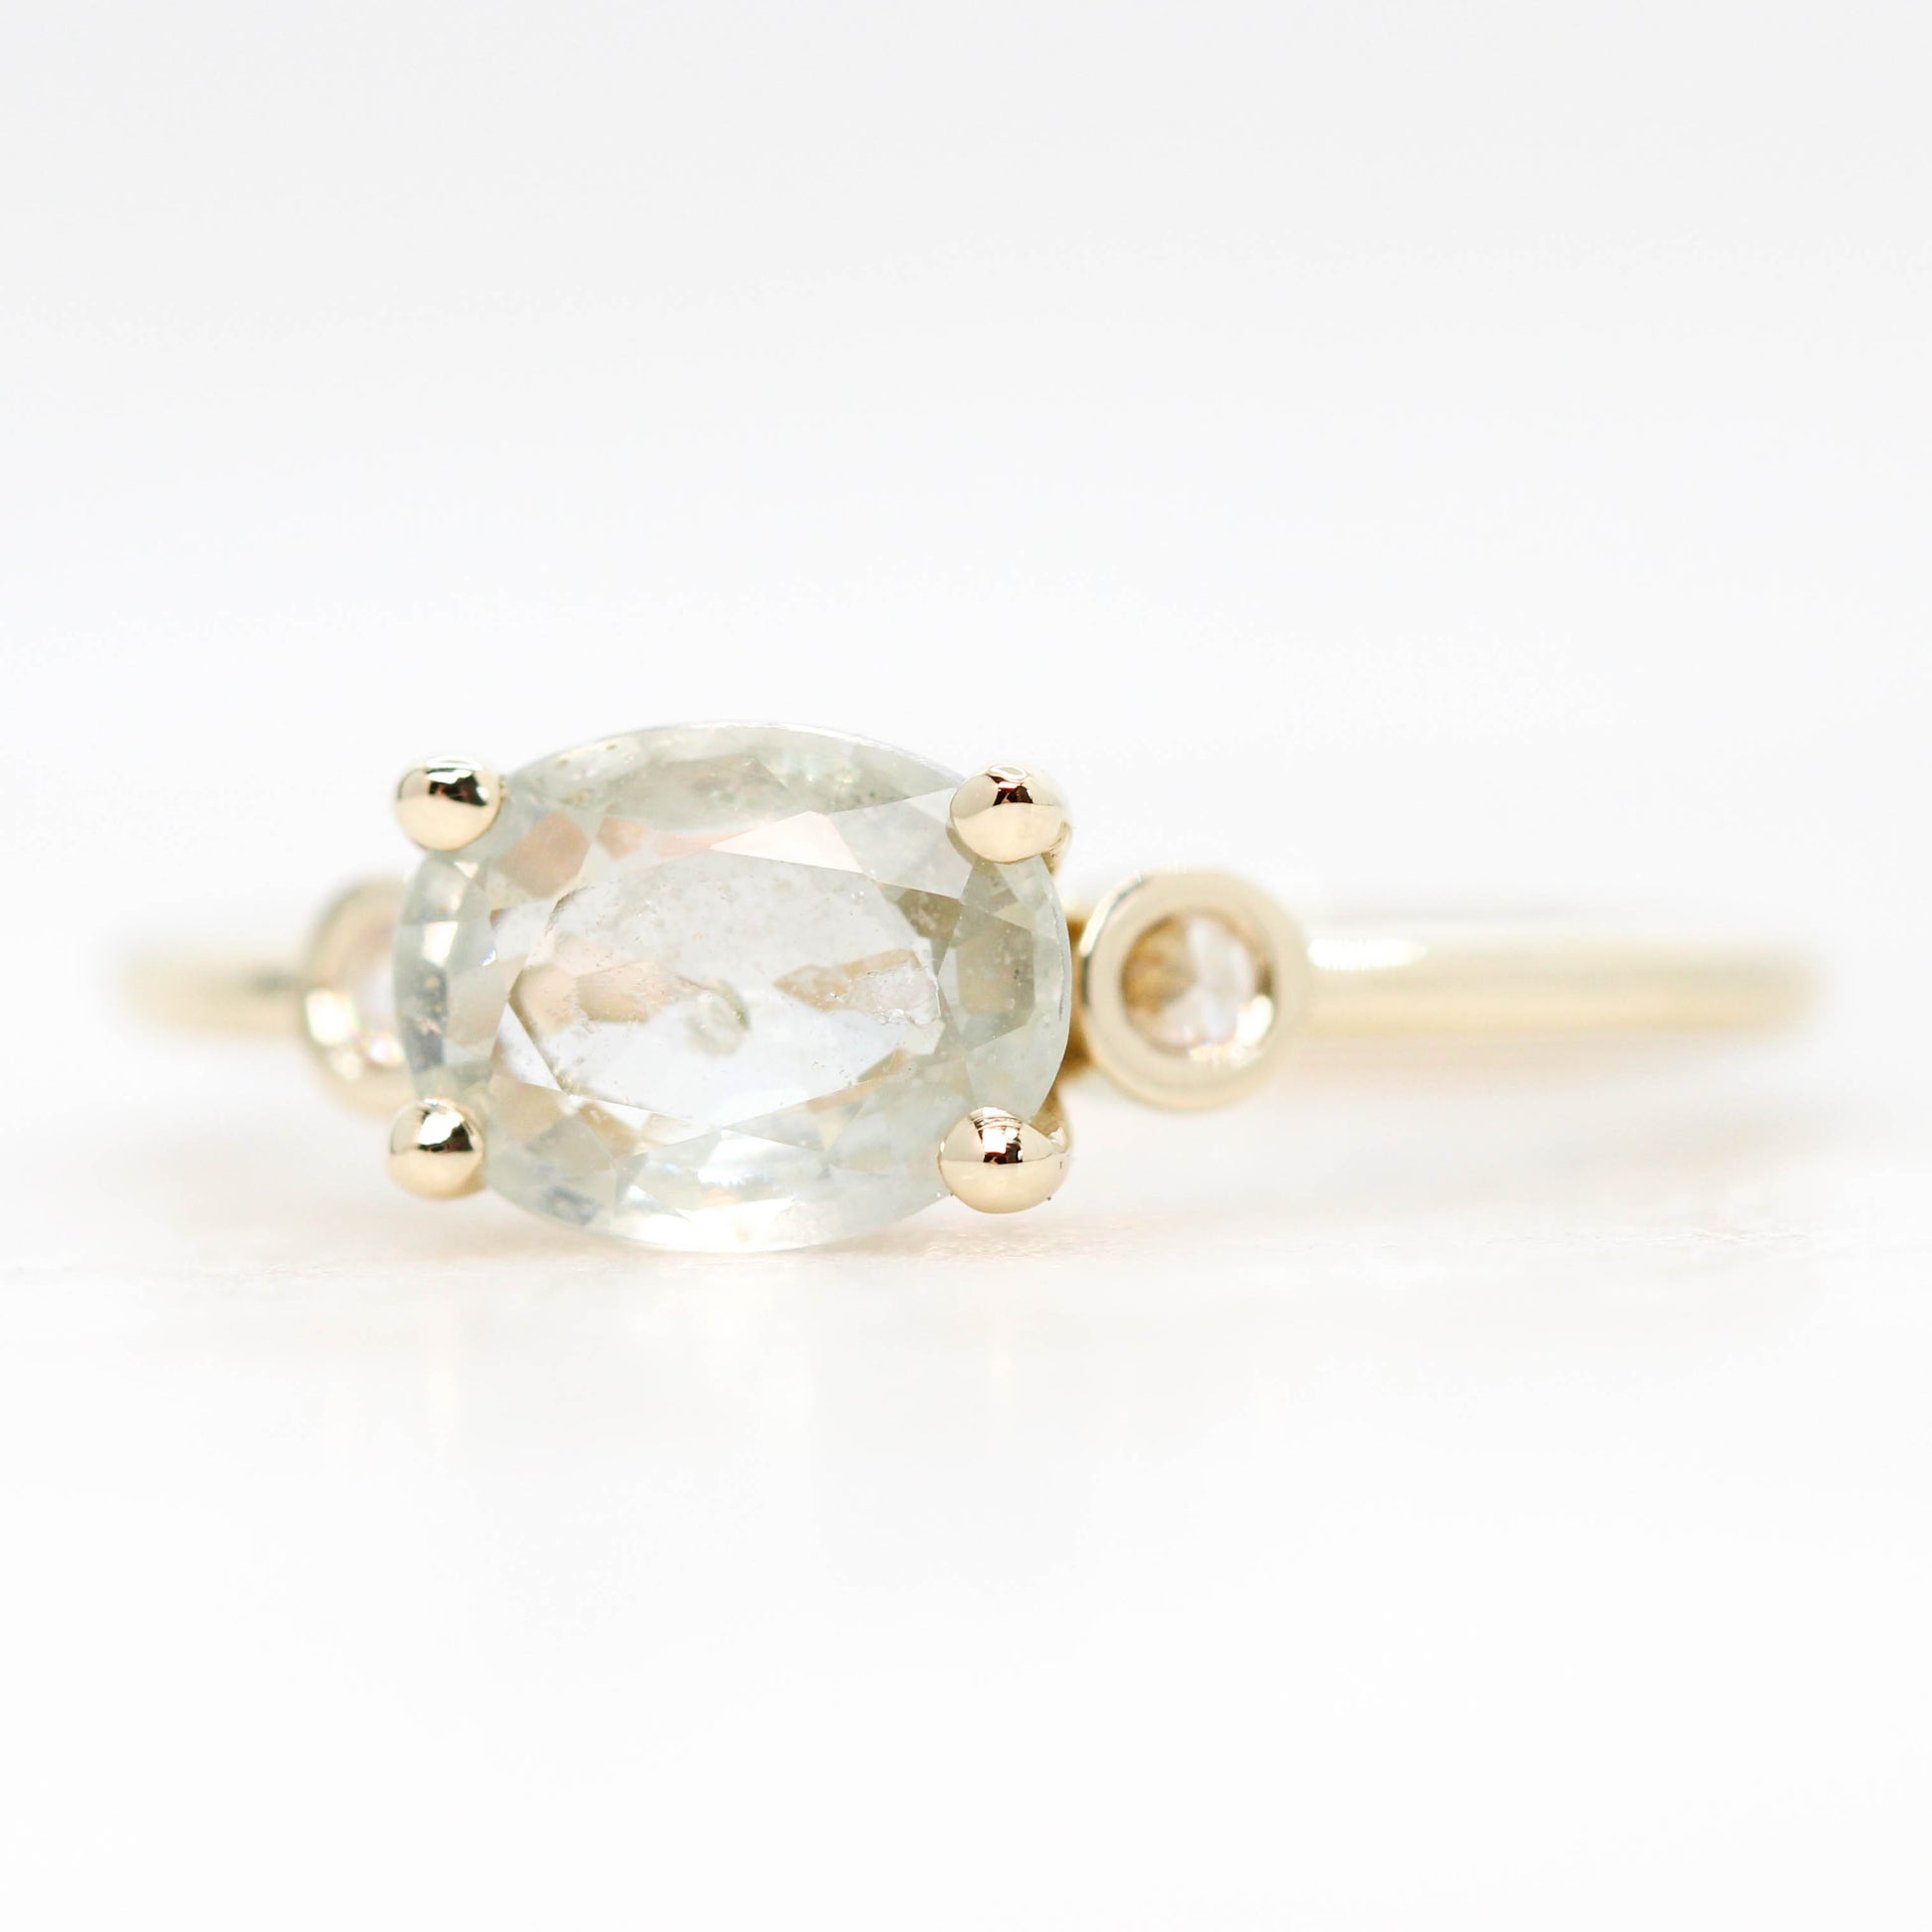 CAELEN (J) Logan Ring with a 1.35 Carat Clear Gray Sapphire and Clear White Rose Cut Accent Diamonds in 14k Yellow Gold - Ready to Size and Ship - Midwinter Co. Alternative Bridal Rings and Modern Fine Jewelry